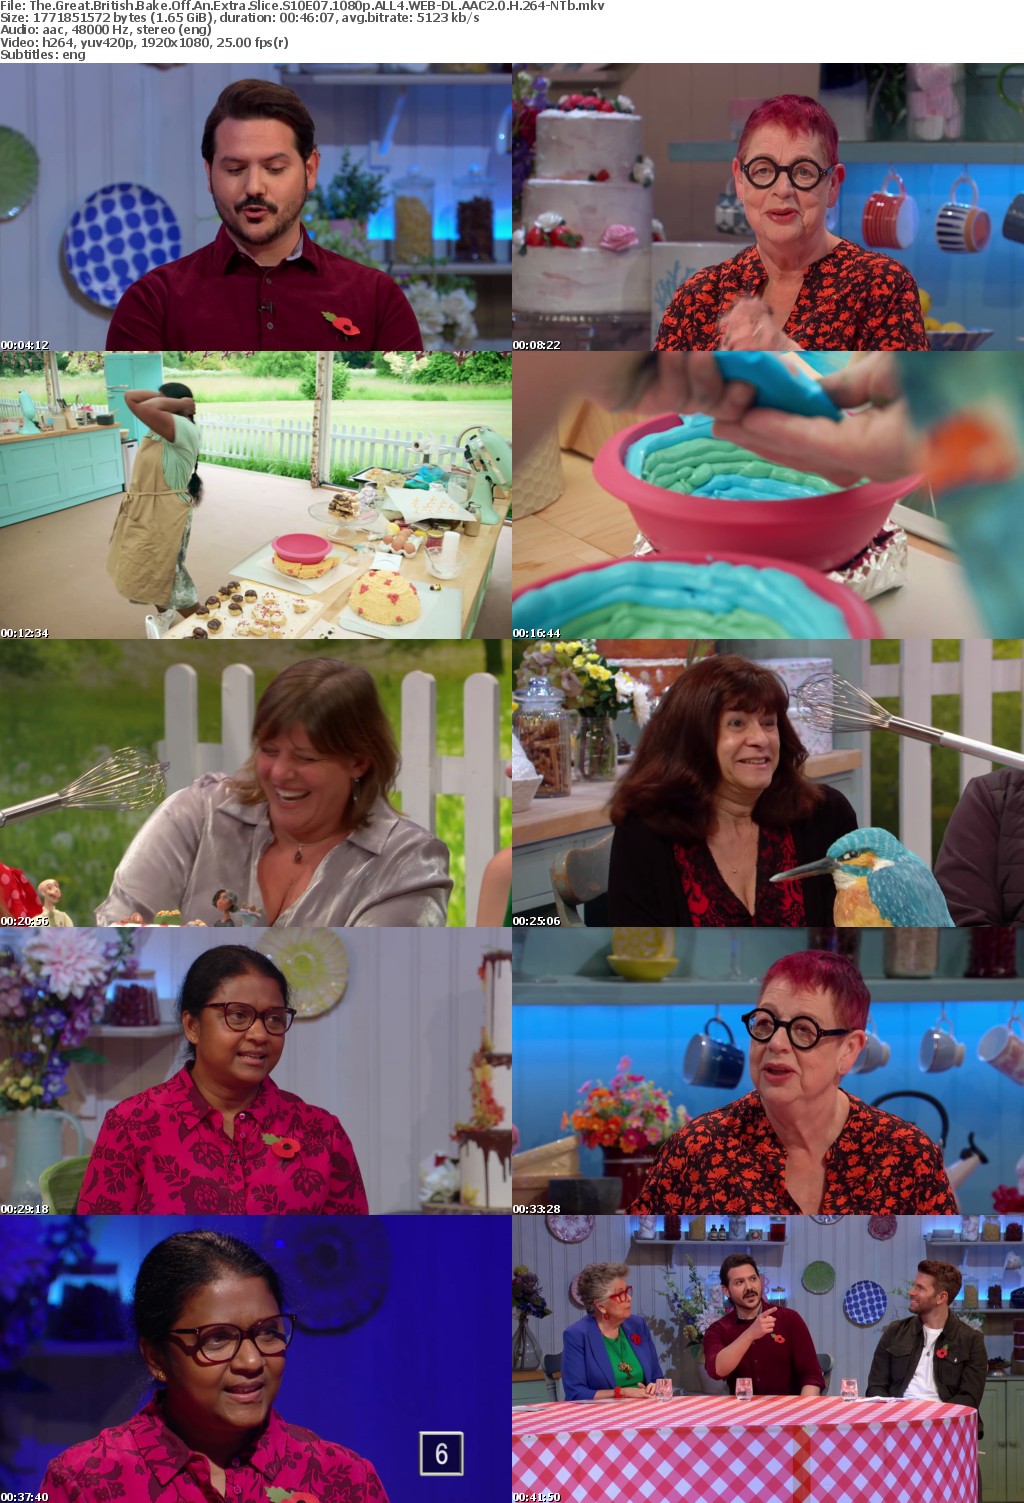 The Great British Bake Off An Extra Slice S10E07 1080p ALL4 WEB-DL AAC2 0 H 264-NTb